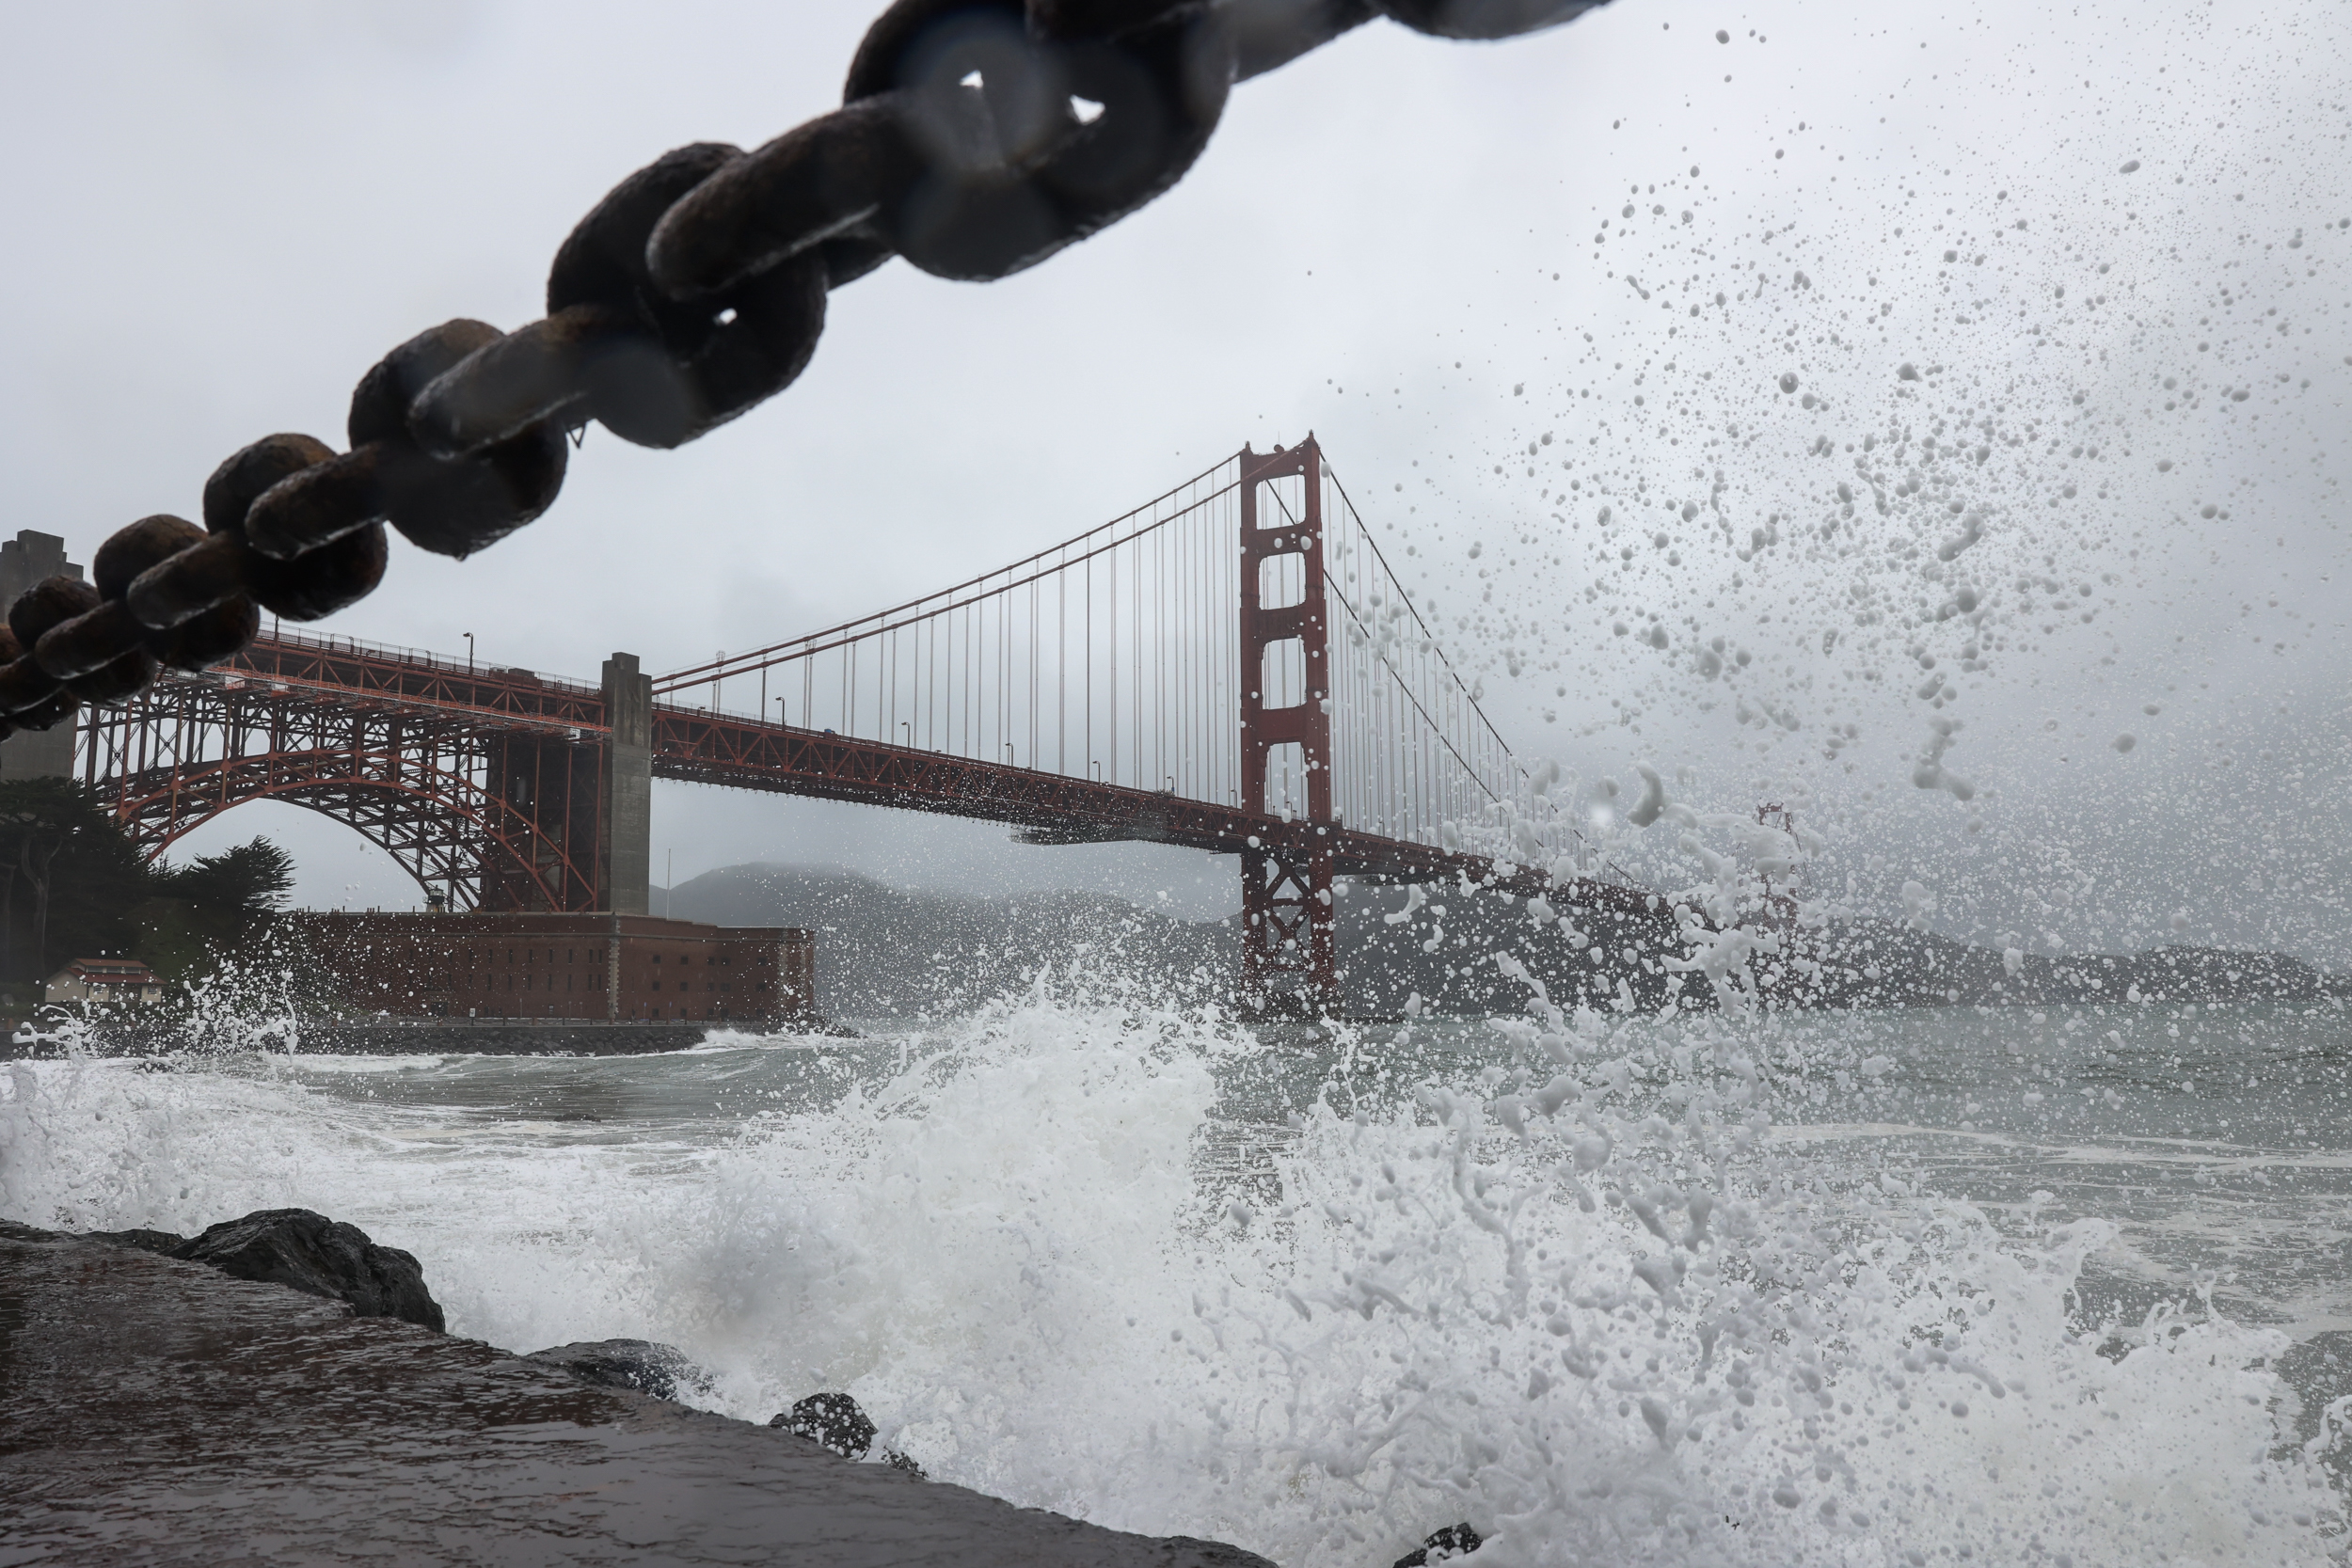 Golden Gate Bridge Suicide Net Completion in Sight: Why Did It Take So Long?